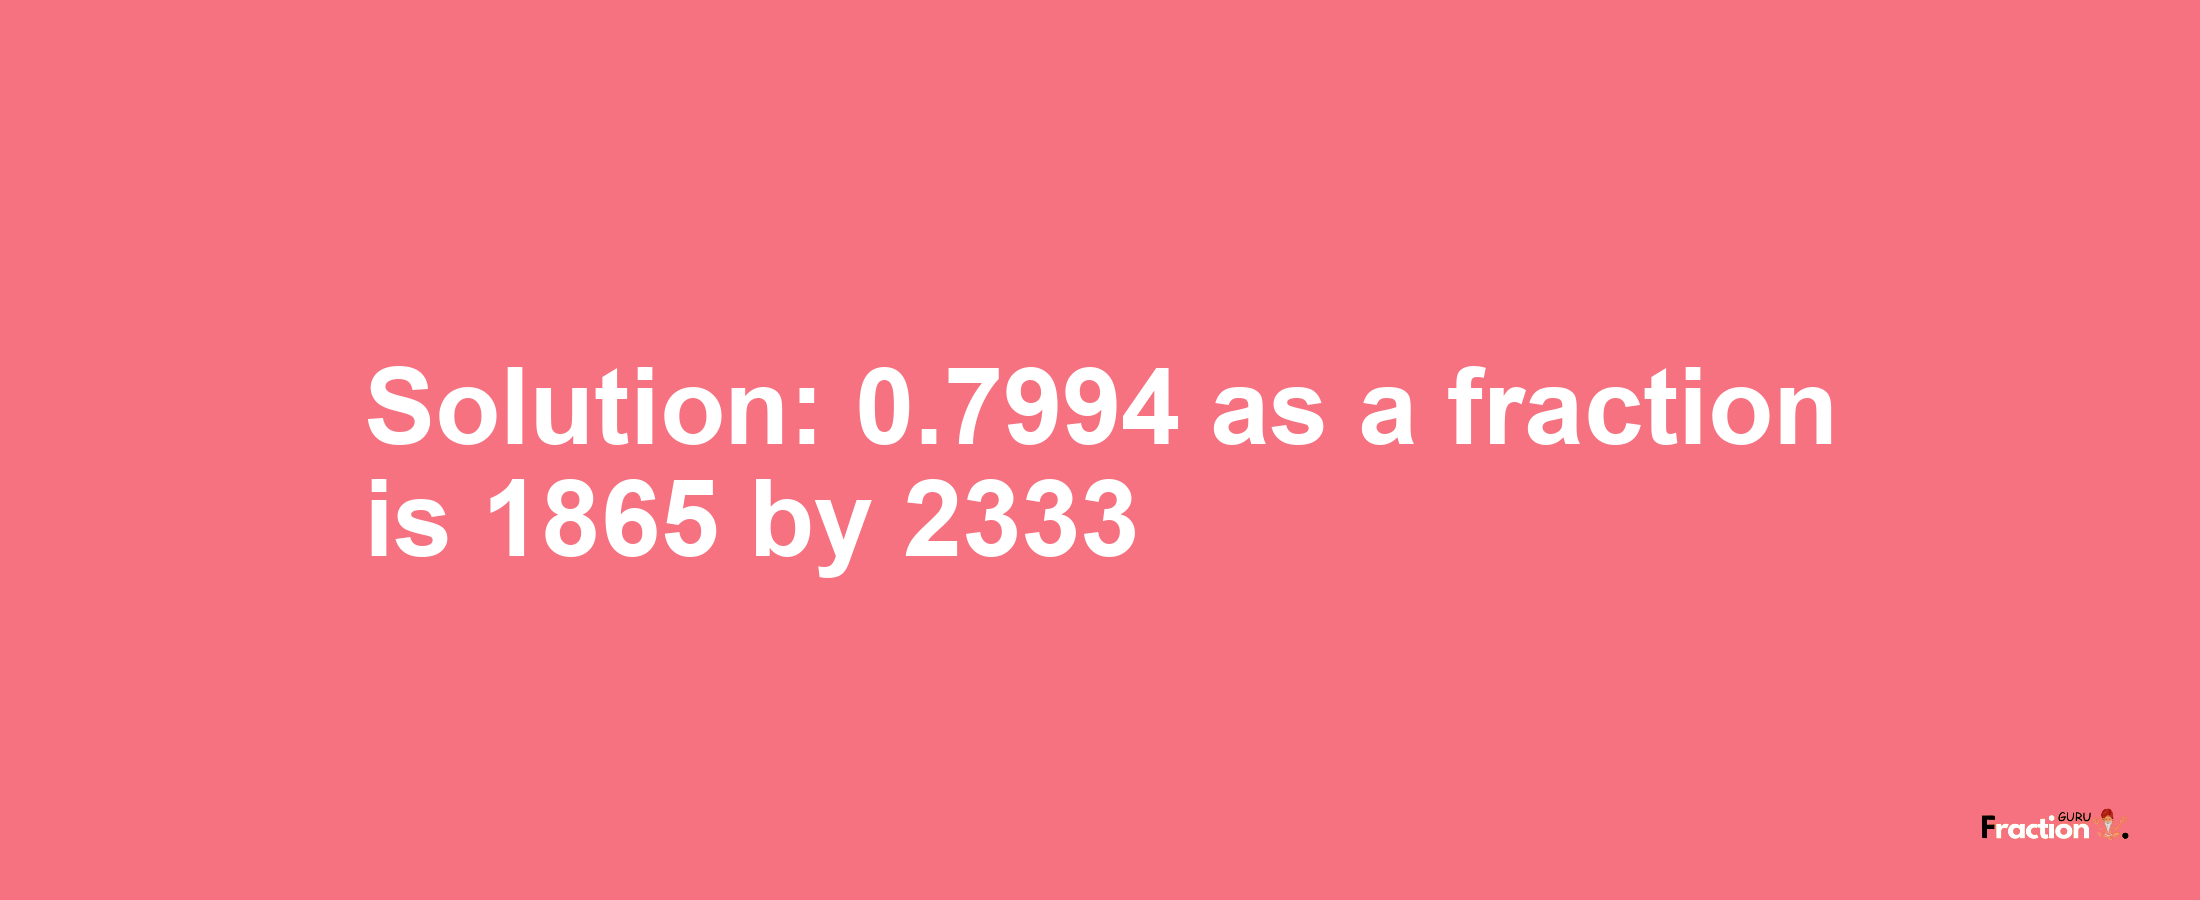 Solution:0.7994 as a fraction is 1865/2333